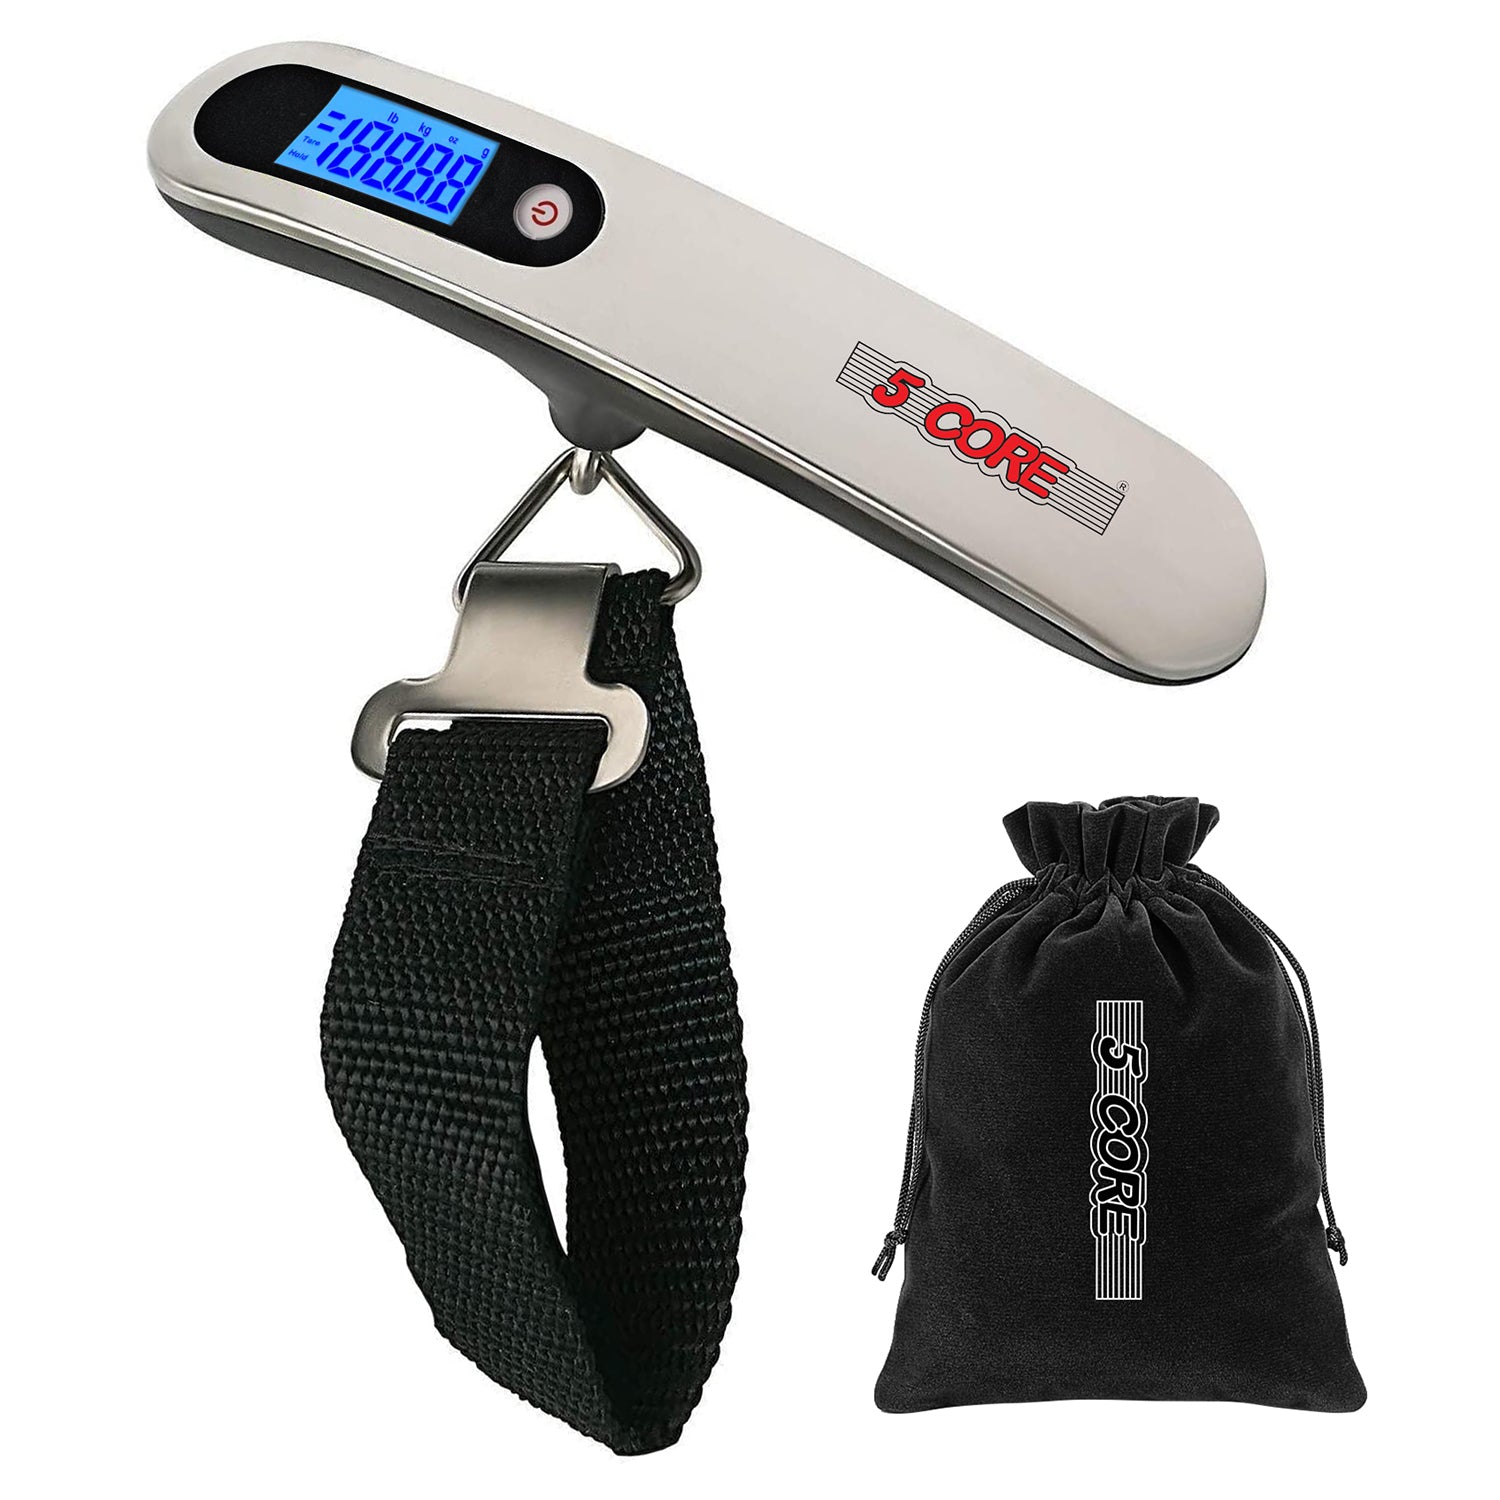 5Core Luggage Scale Tavel Digital 110lbs Capacity Suitcase Scales Hanging Baggage Weighing Machine